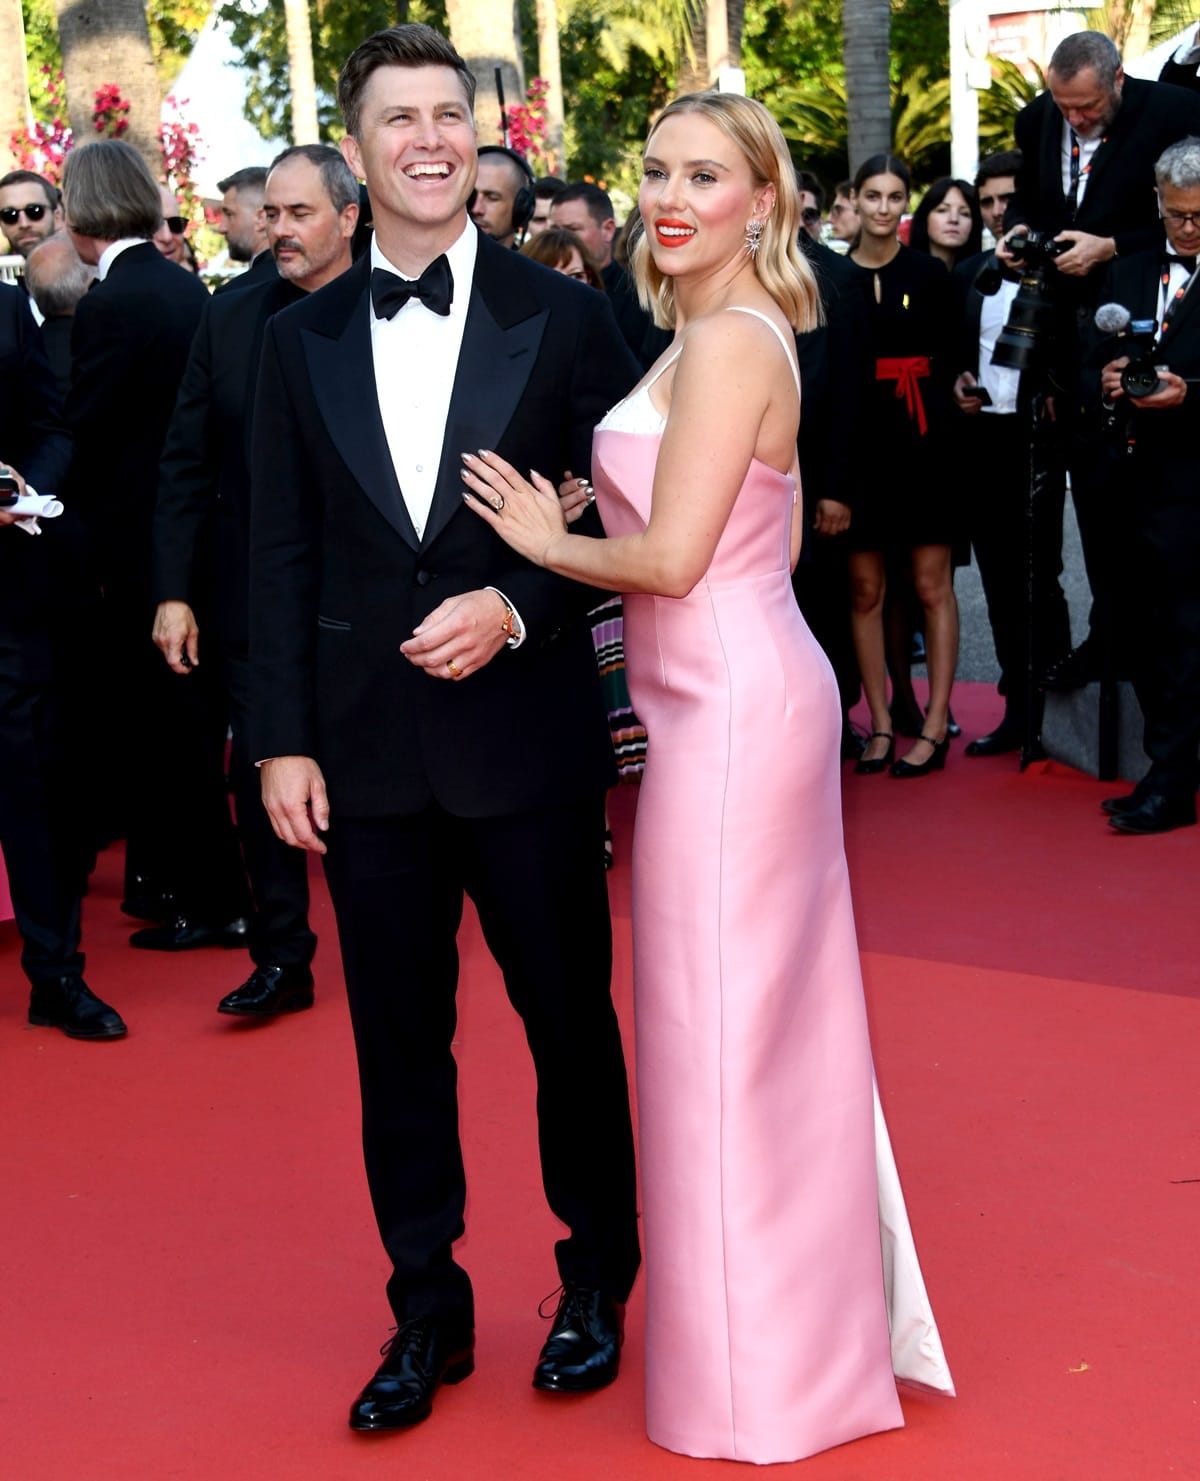 Colin Jost and Scarlett Johansson made a dazzling impression on the "Asteroid City" red carpet during the 76th annual Cannes film festival